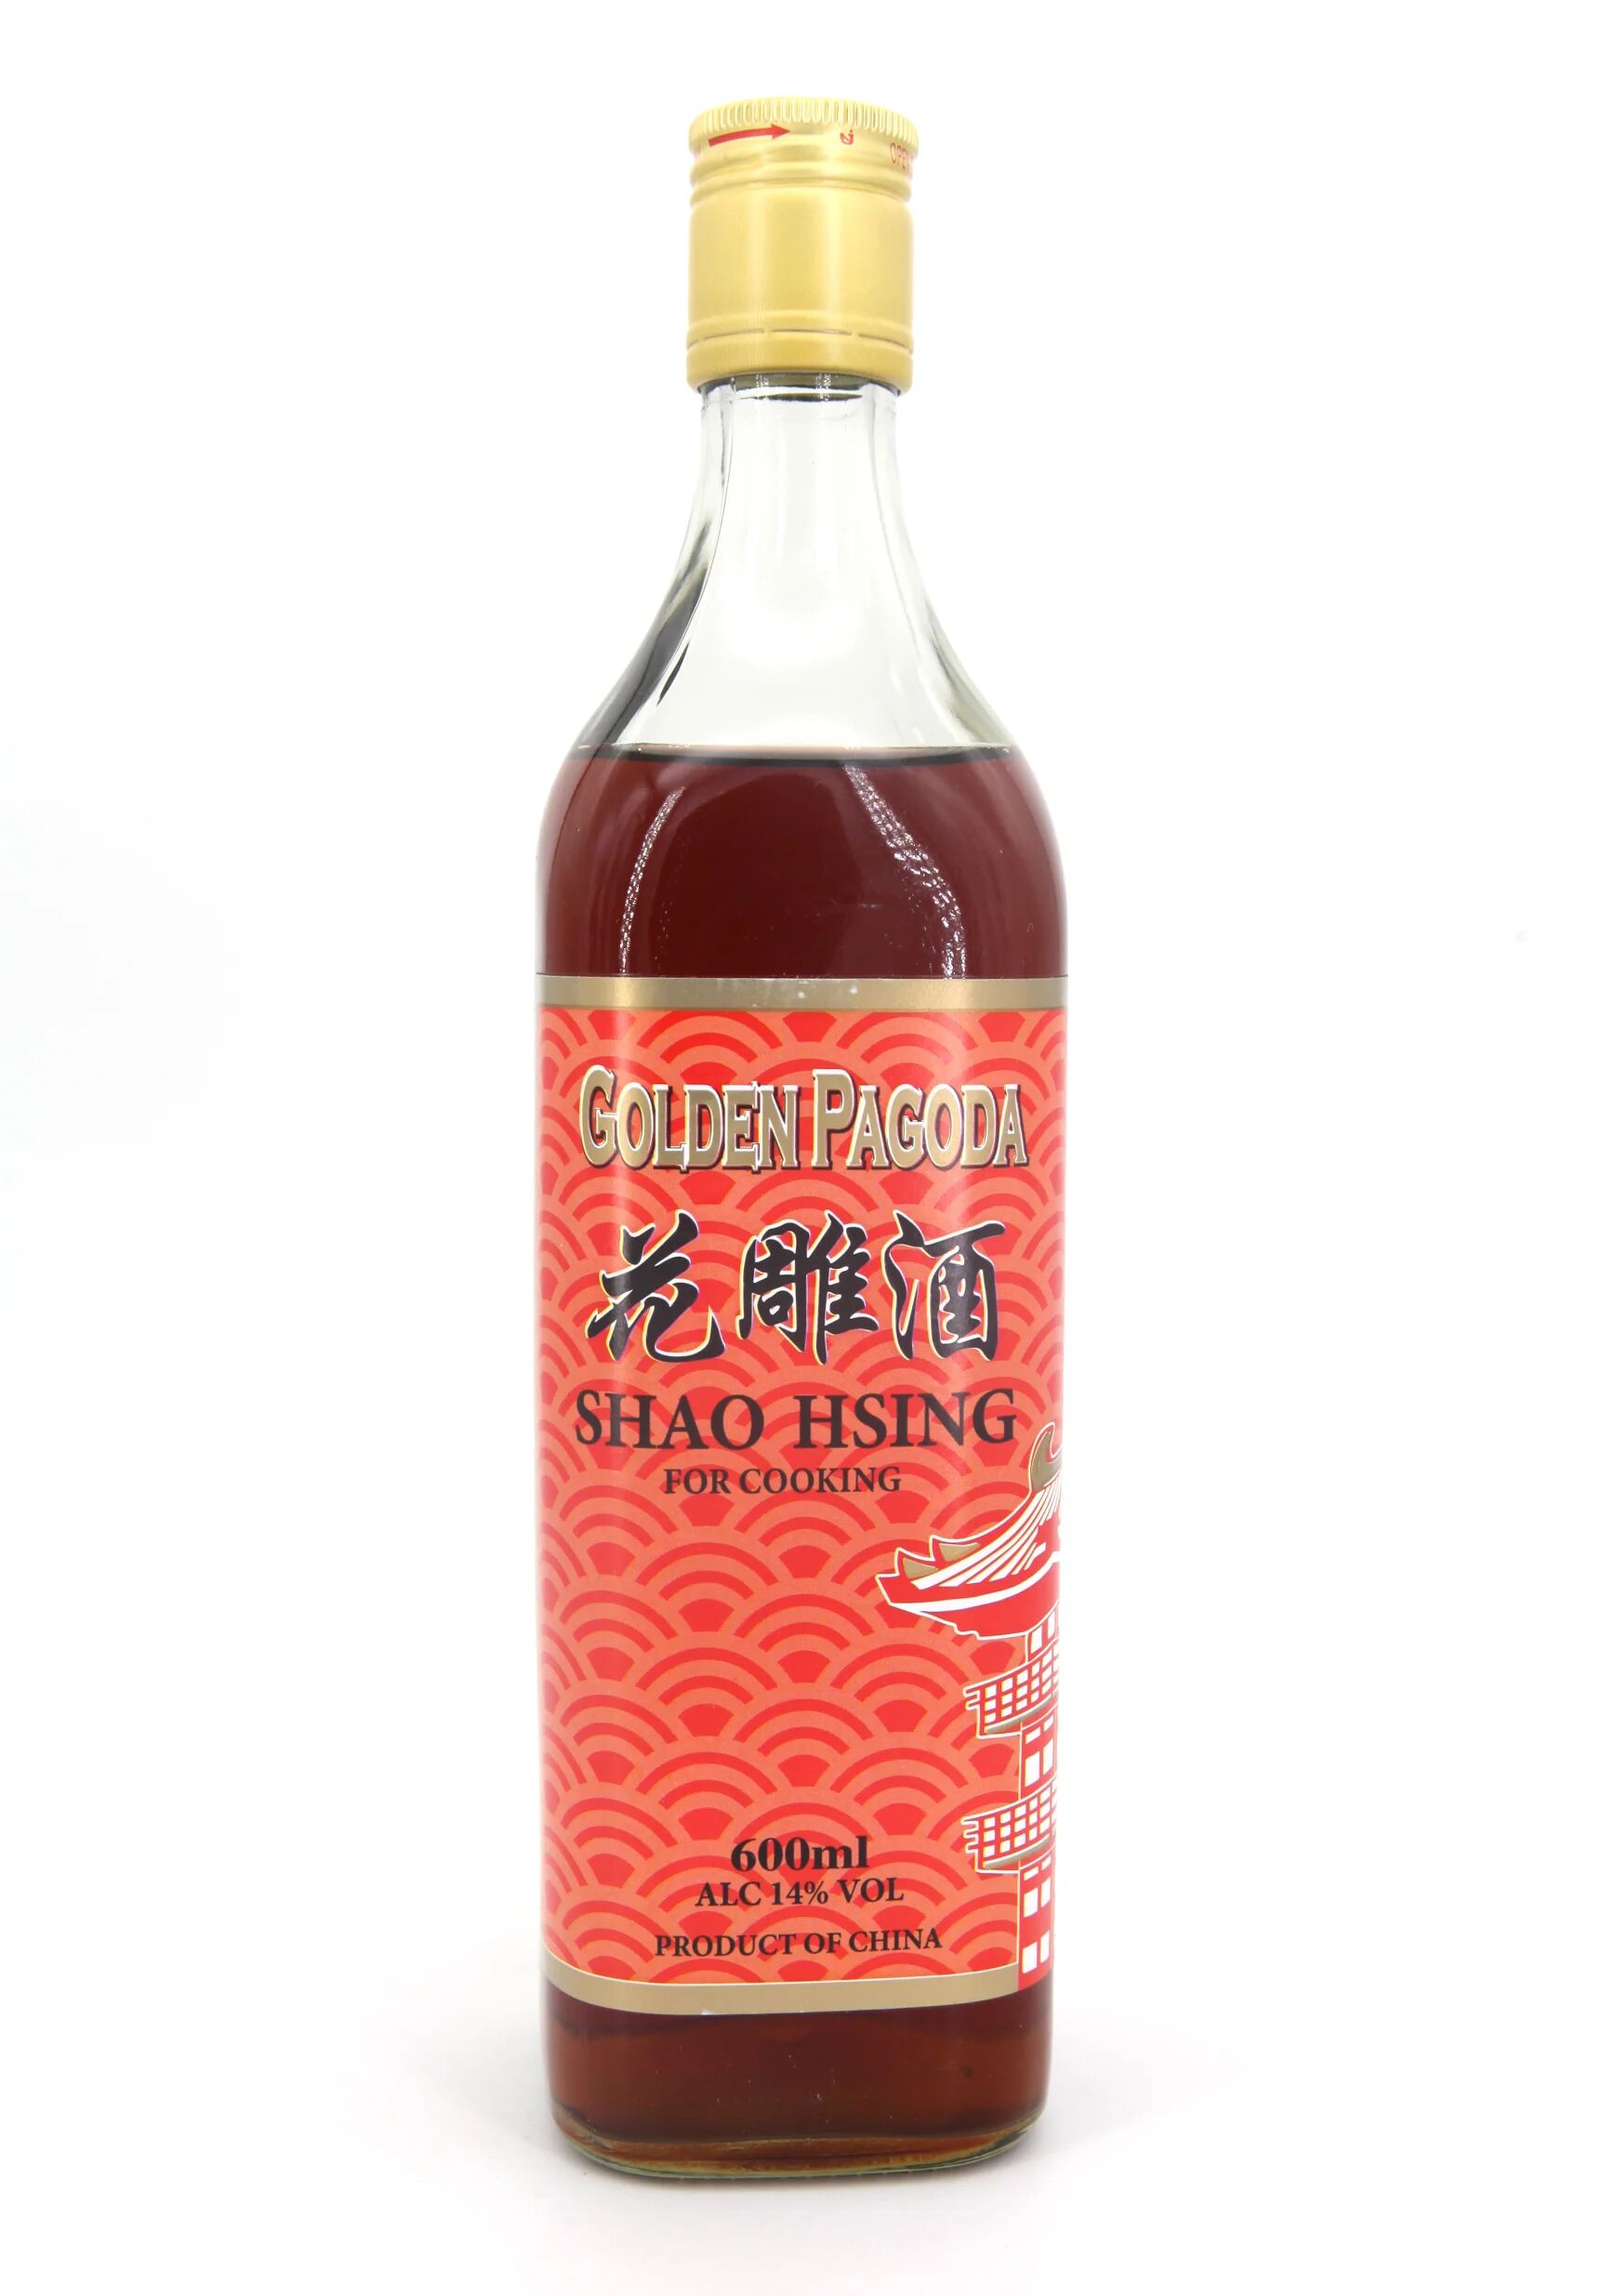 Asiamarché france Vin de cuisson (Cooking Wine) Shao Hsing 60cl Pagoda